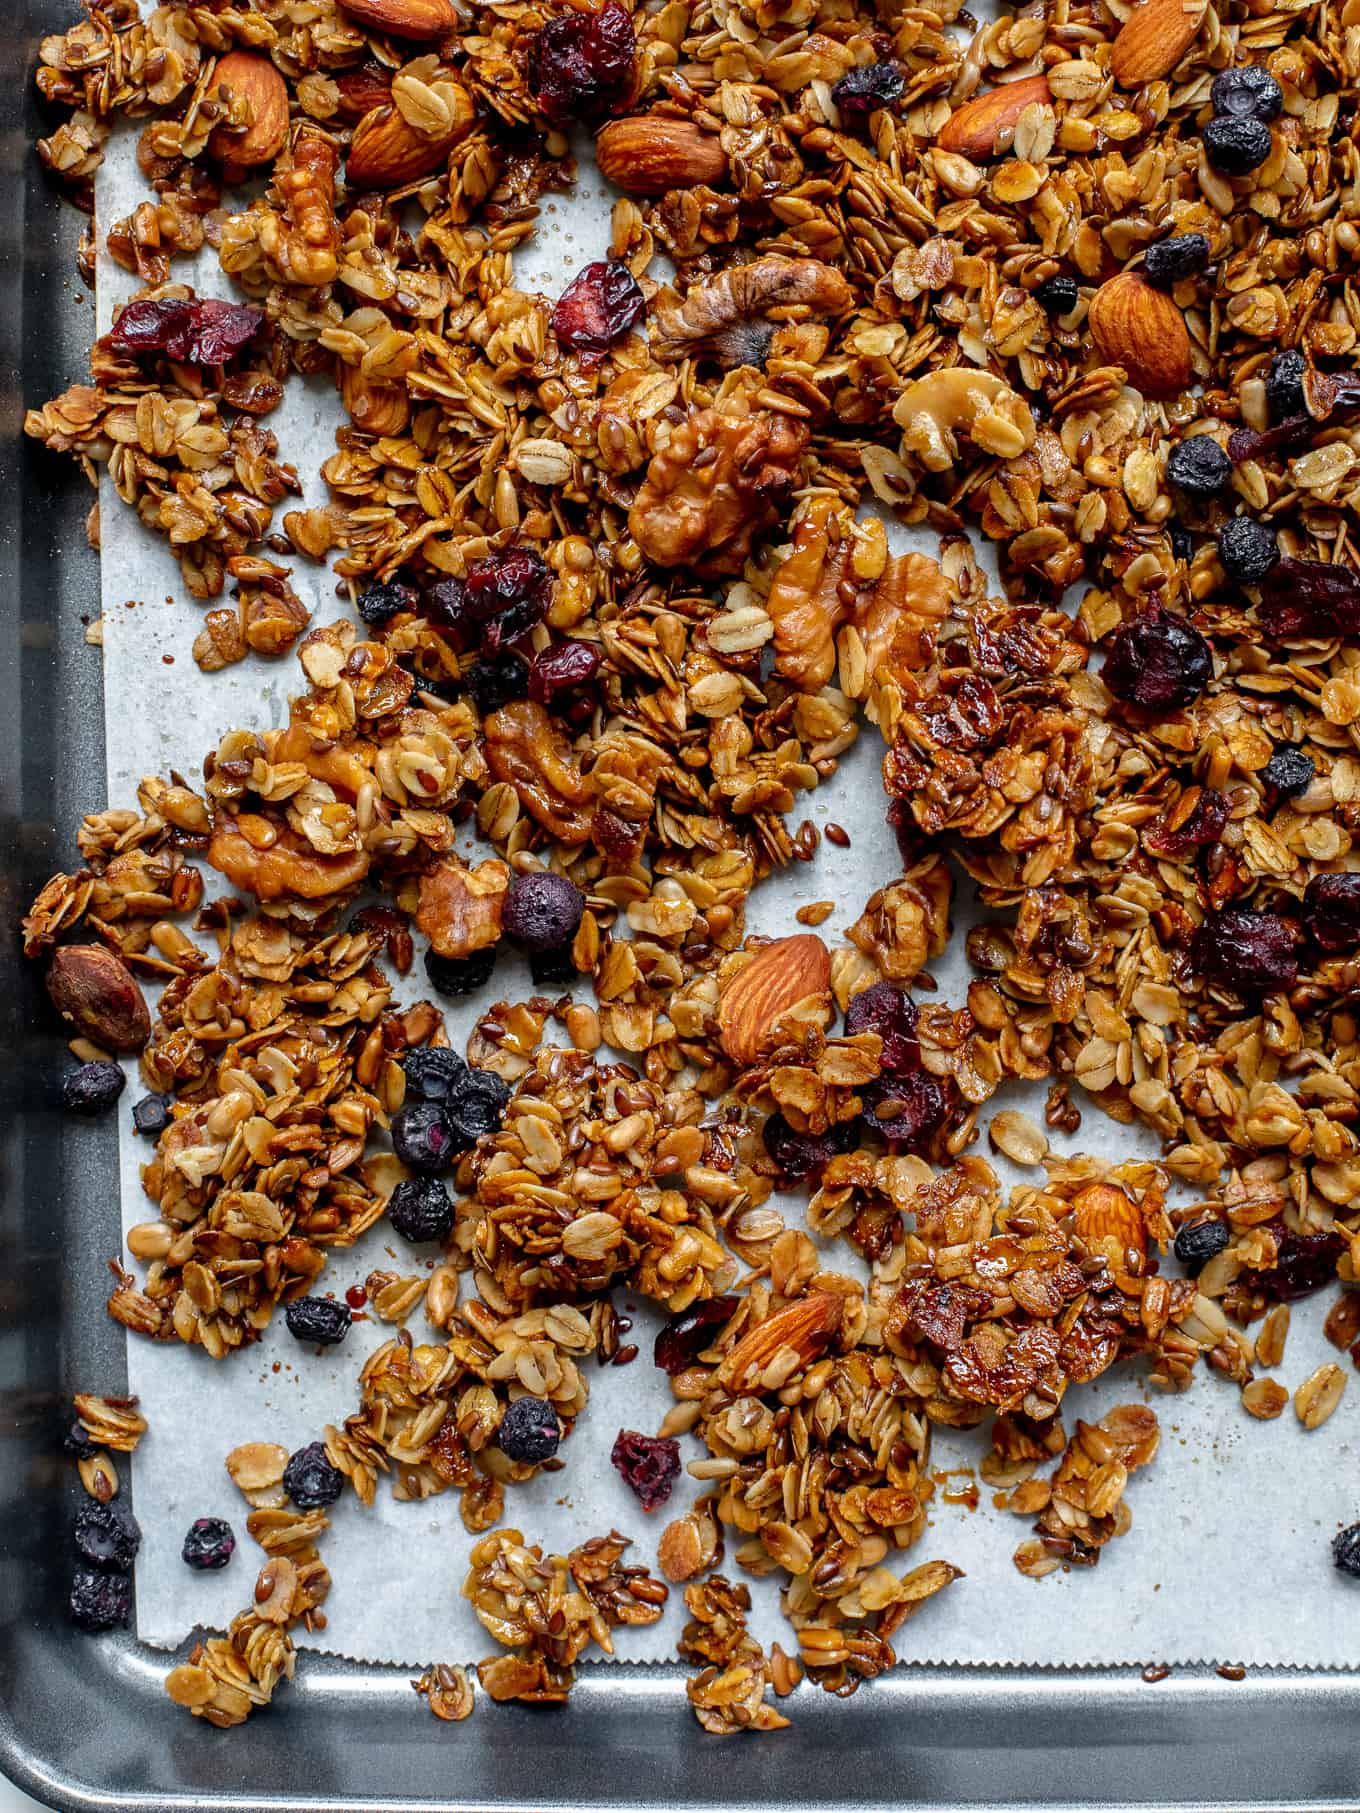 Crunchy Granola Recipe With Berries